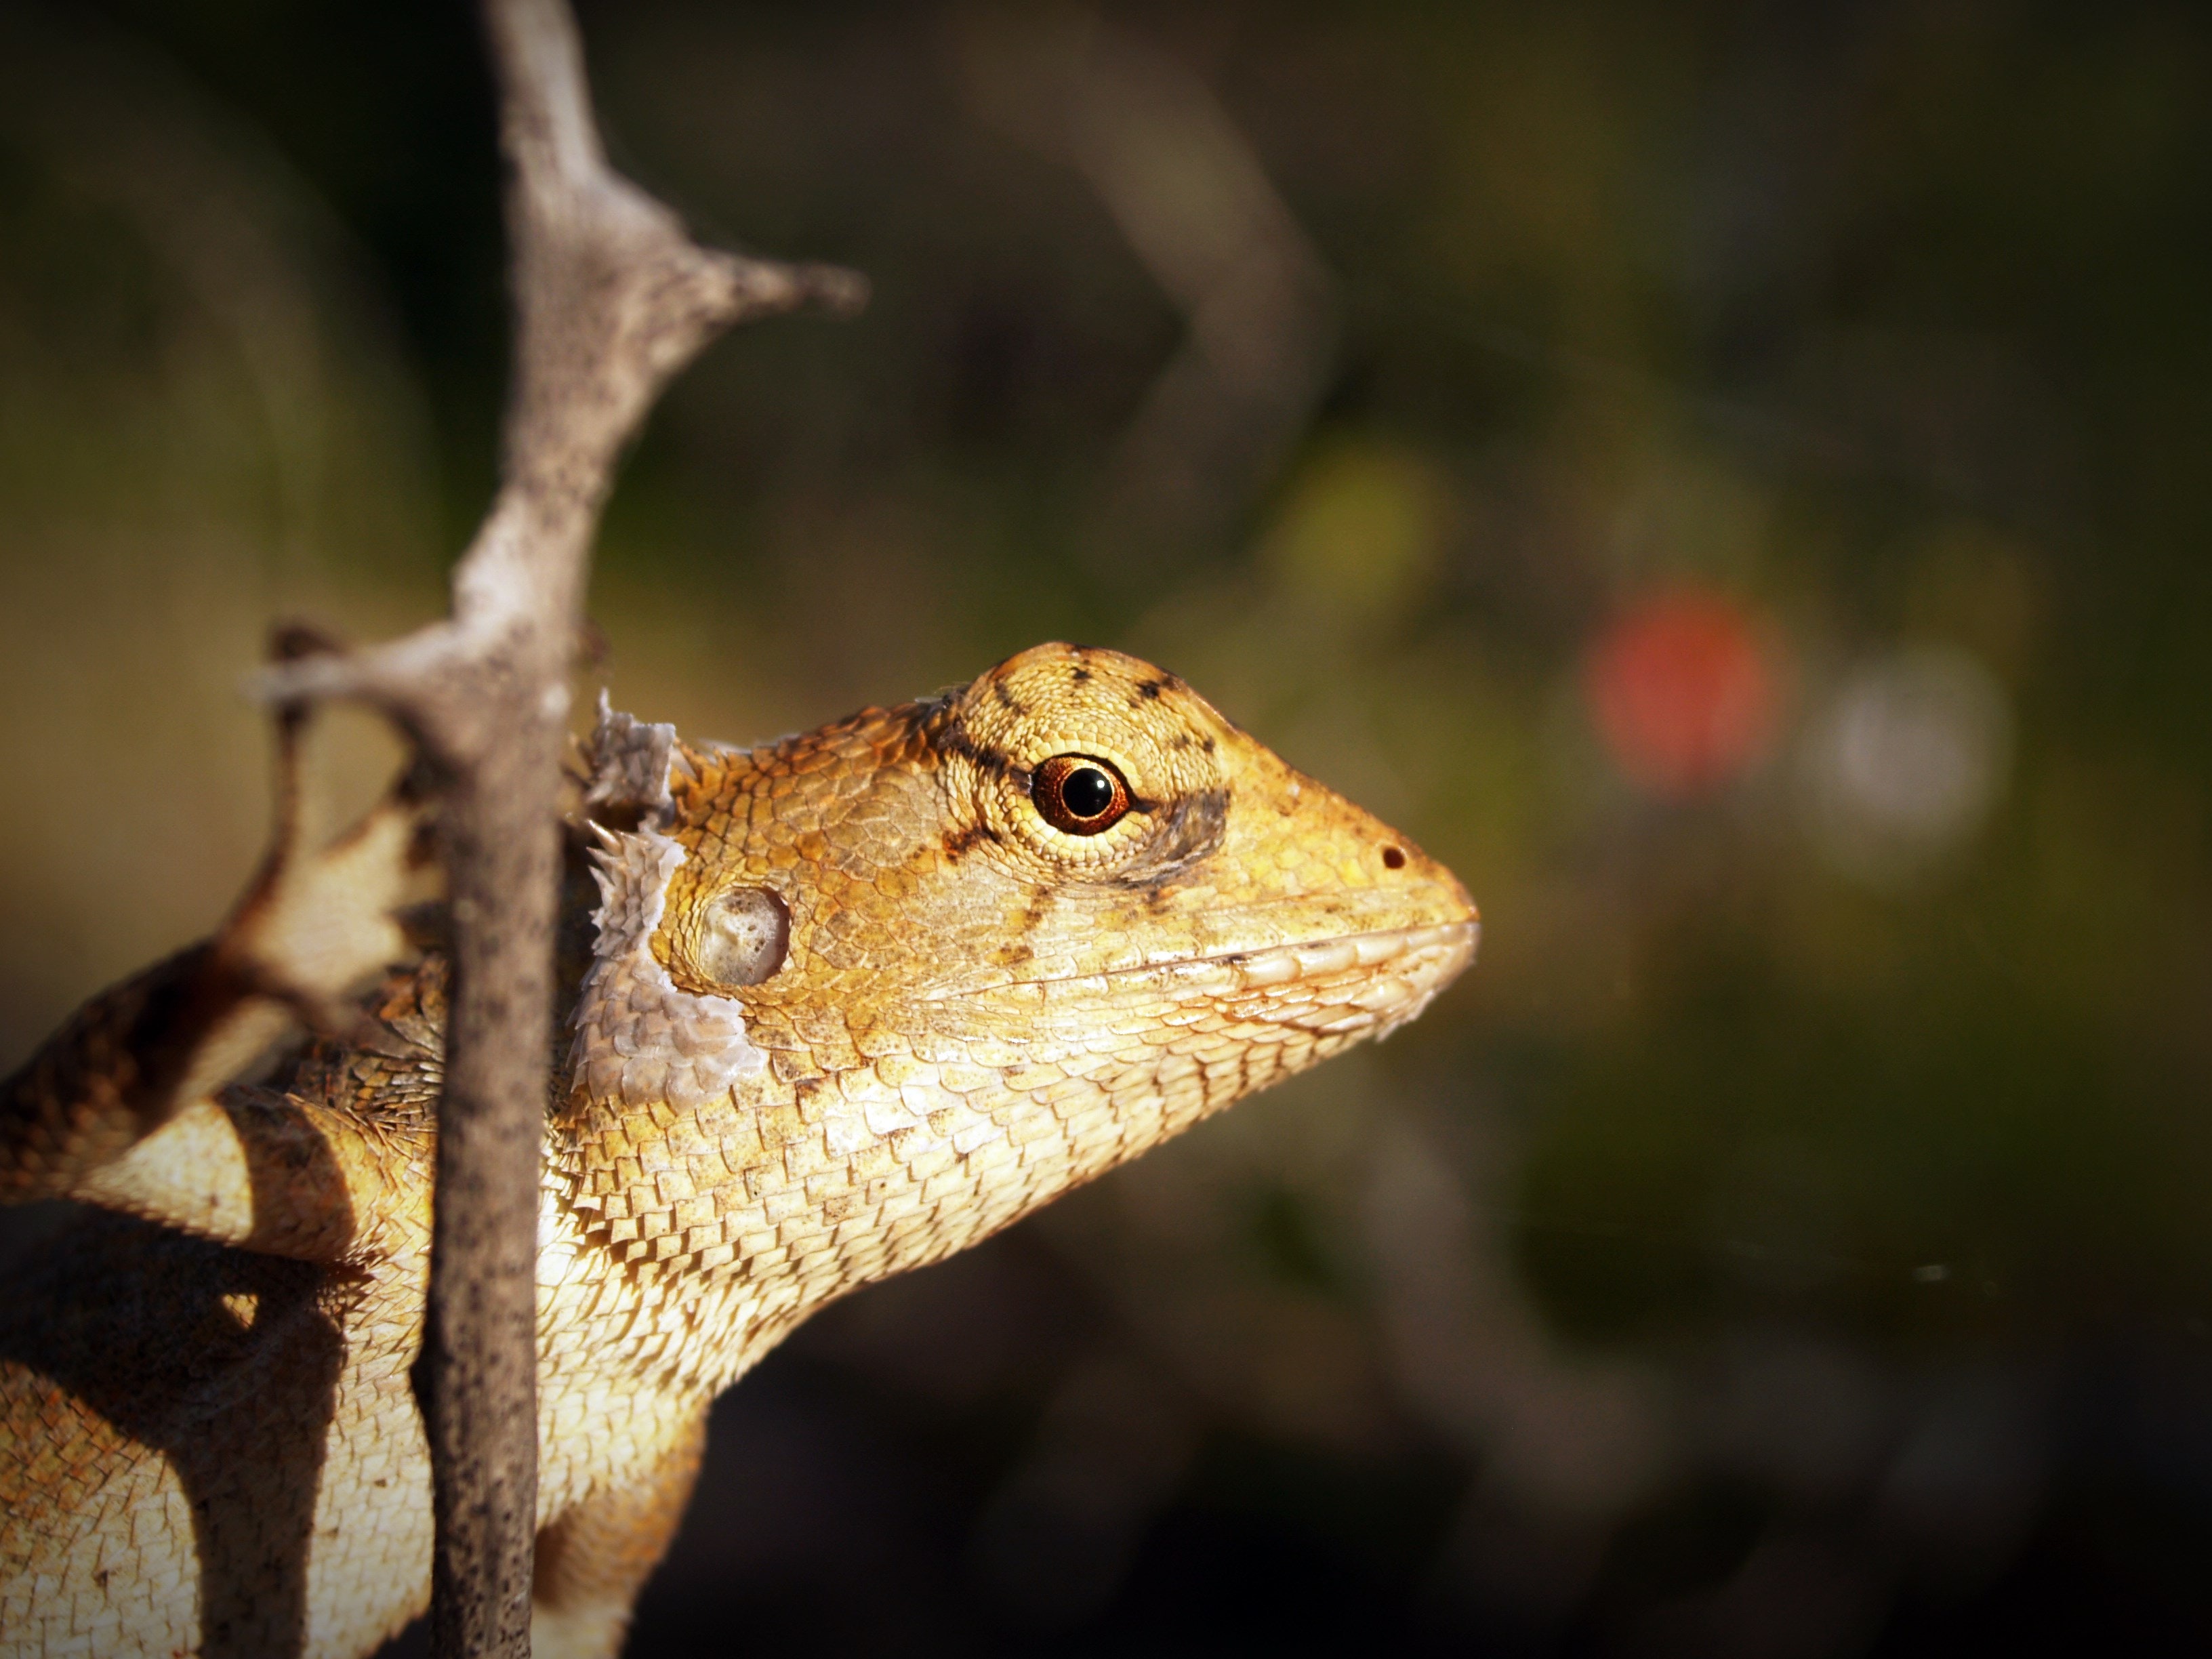 Shallow focus photography of yellow and white lizard clinging on tree branch